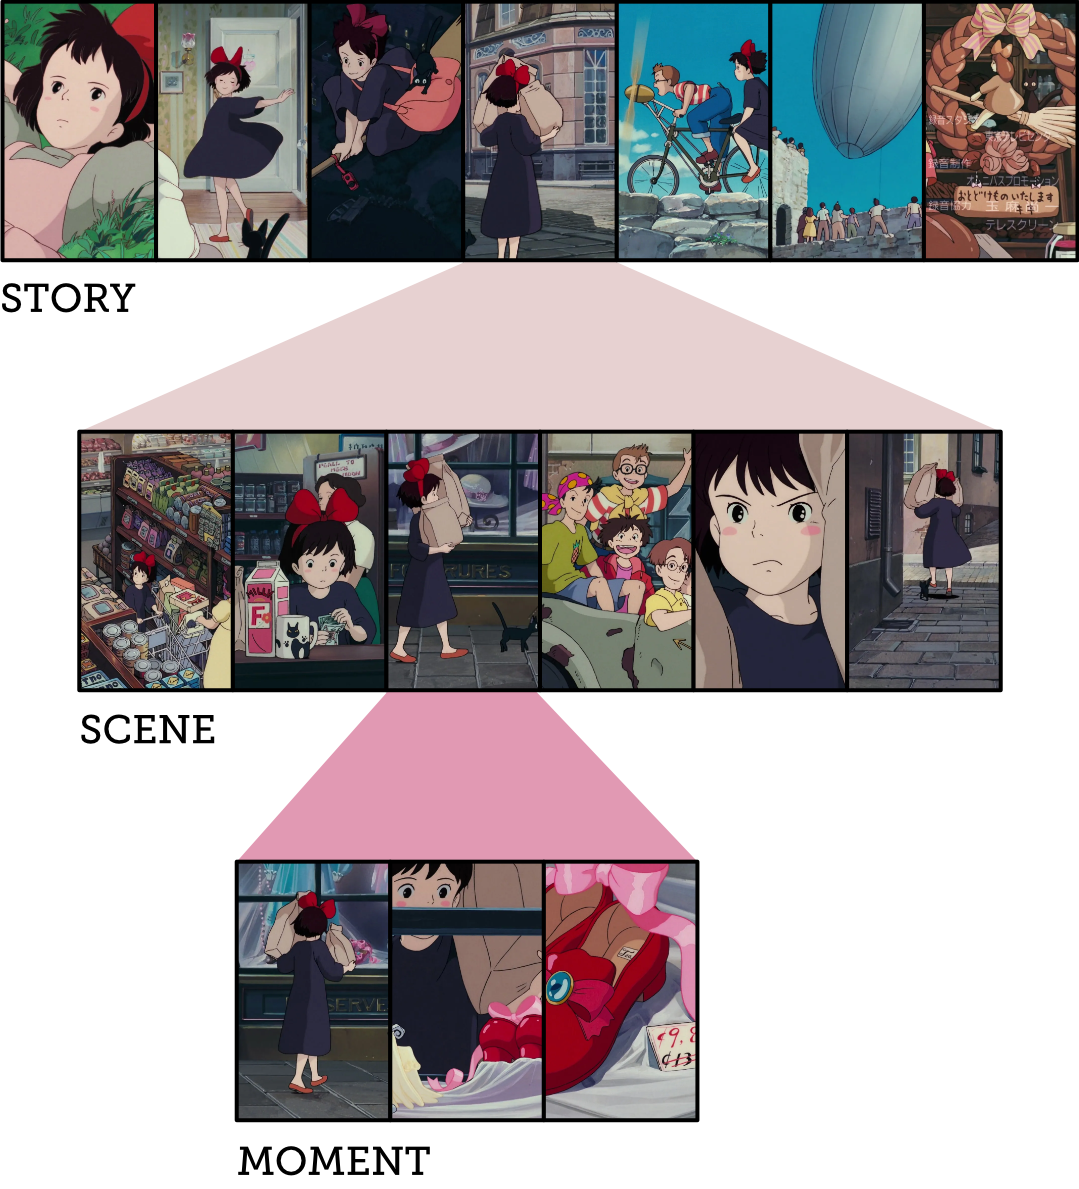 A diagram summarising the film Kiki's Delivery Service in terms of story building blocks.